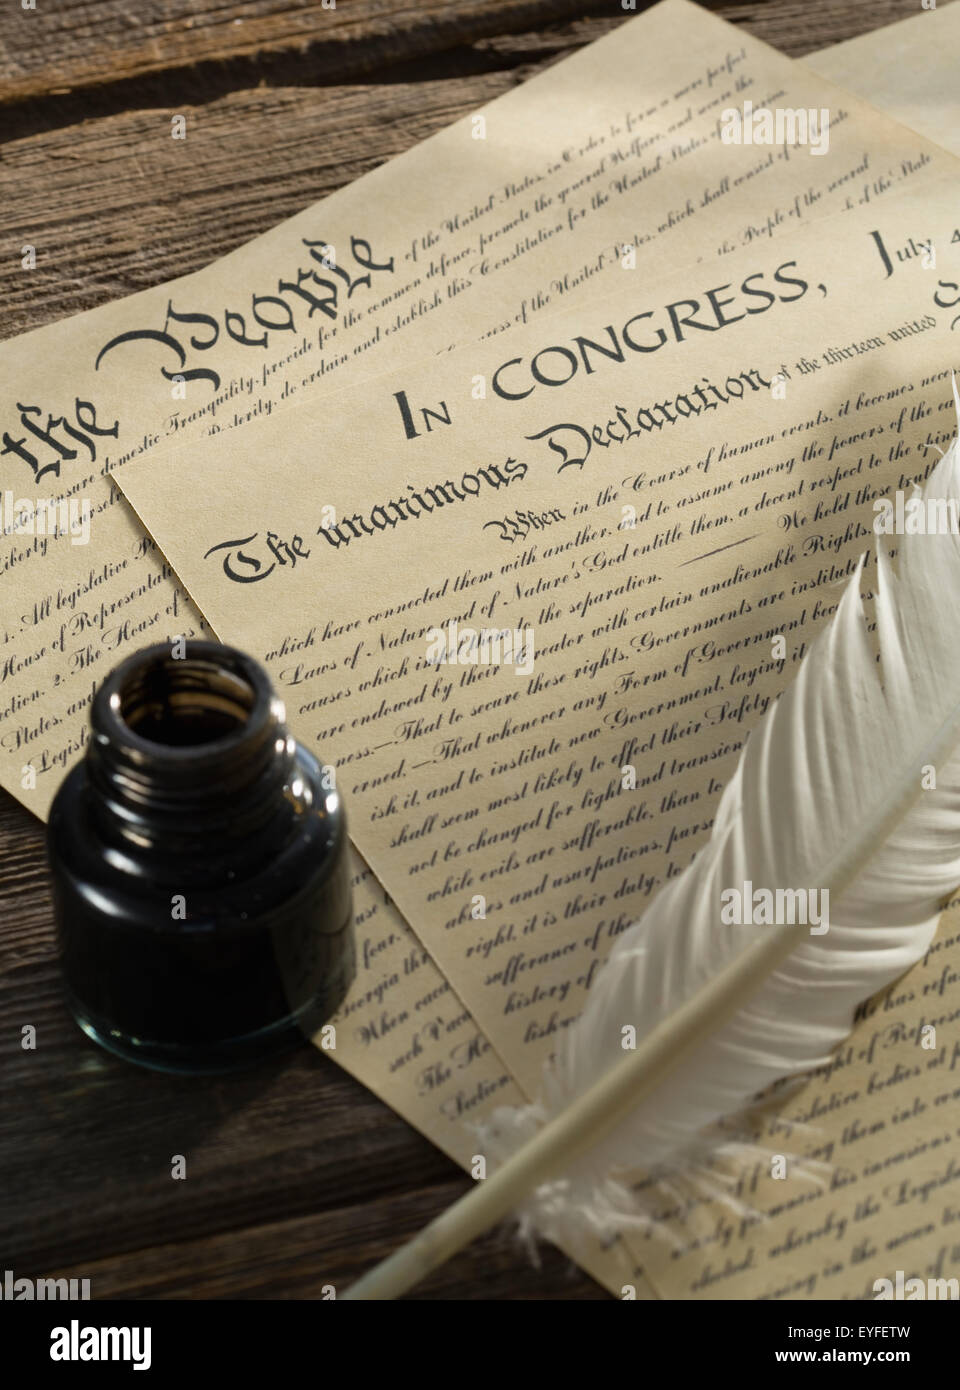 Declaration of Independence Stock Photo